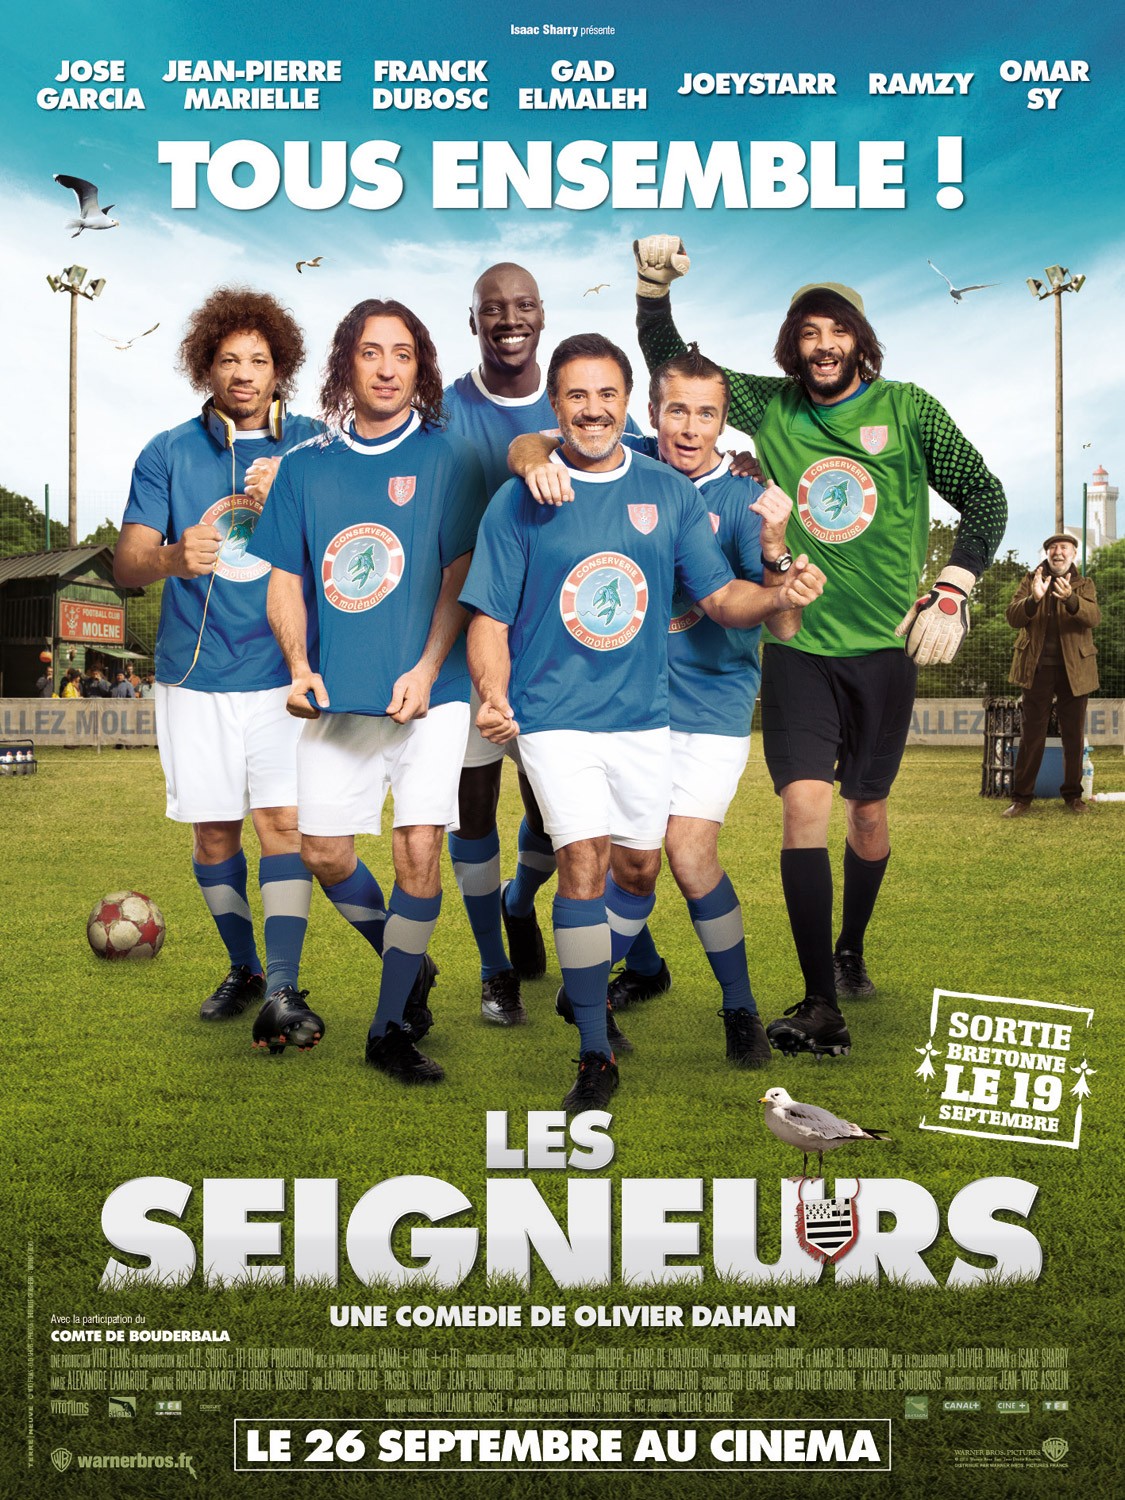 Extra Large Movie Poster Image for Les seigneurs (#2 of 2)